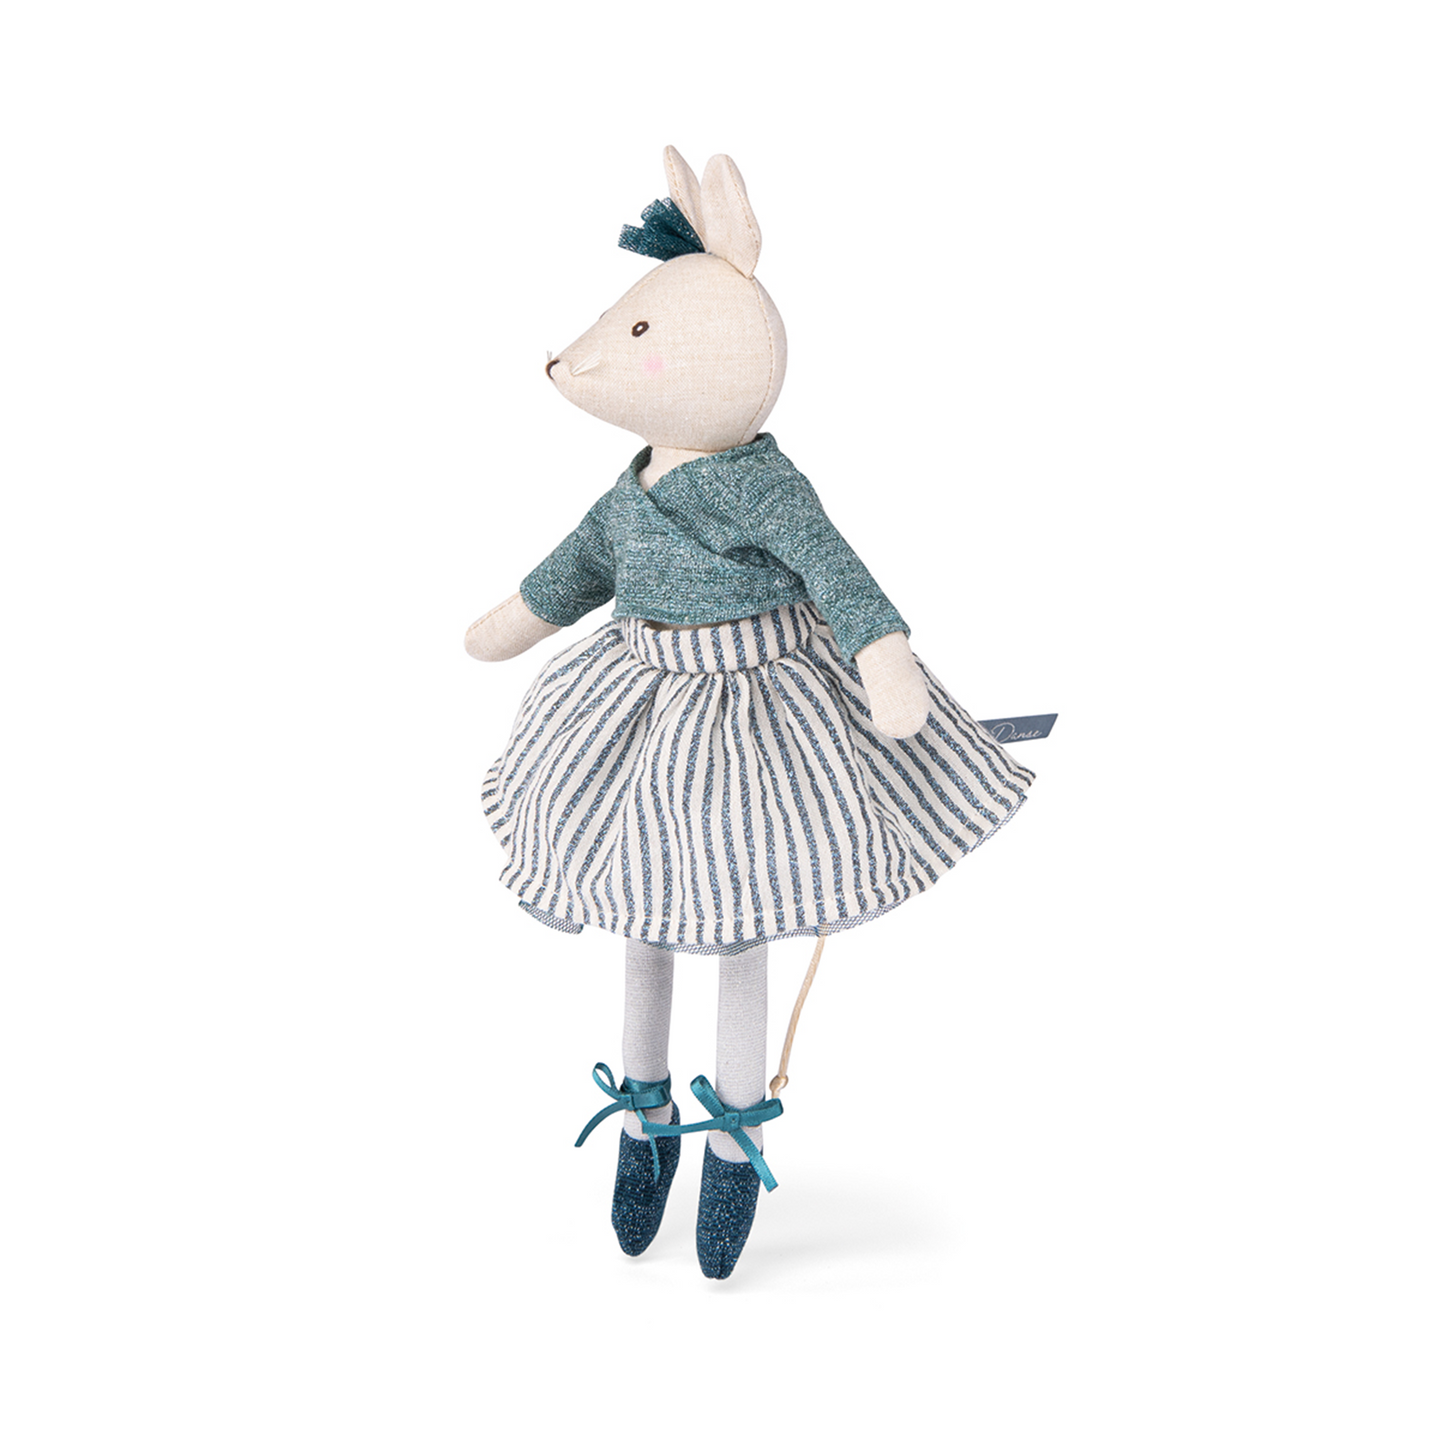 Charlotte is a lovely ballerina soft toy mouse. She is wearing a teal and silver skirt with sparkly netting with silver shimmery legs and soft teal ballet pumps. She has little pink rosy checks and a very long mouse tail.